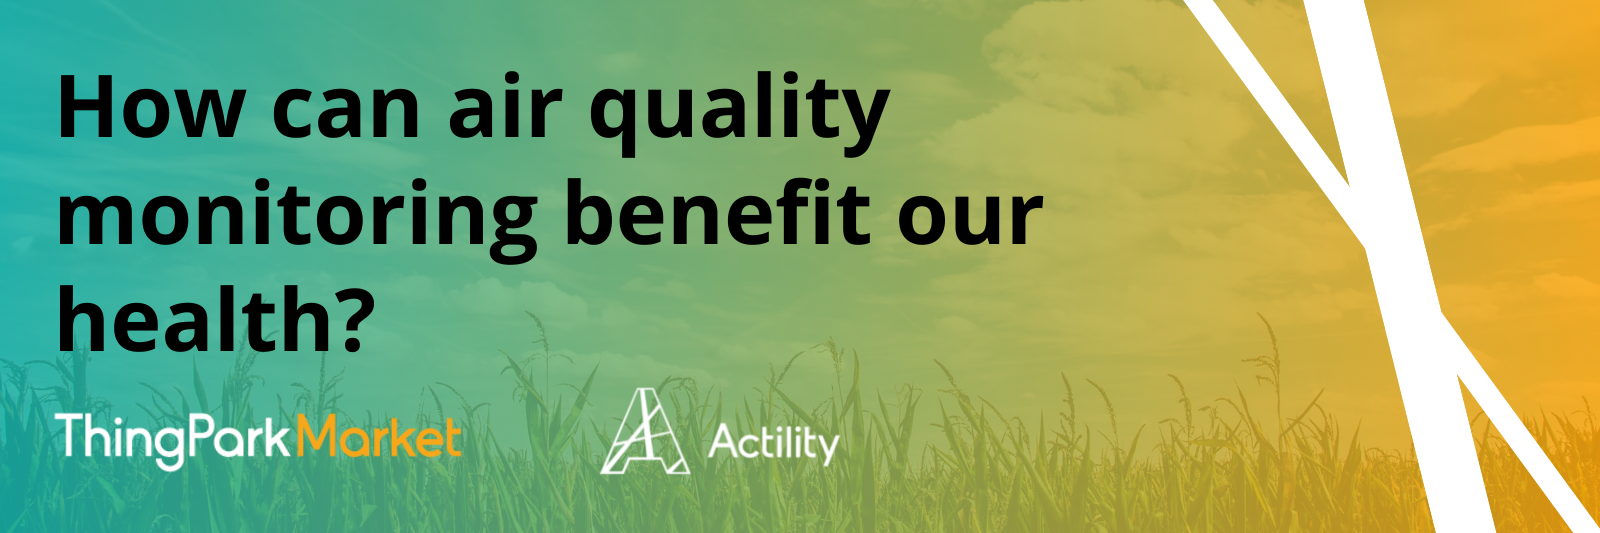 How can air quality monitoring benefit our health?